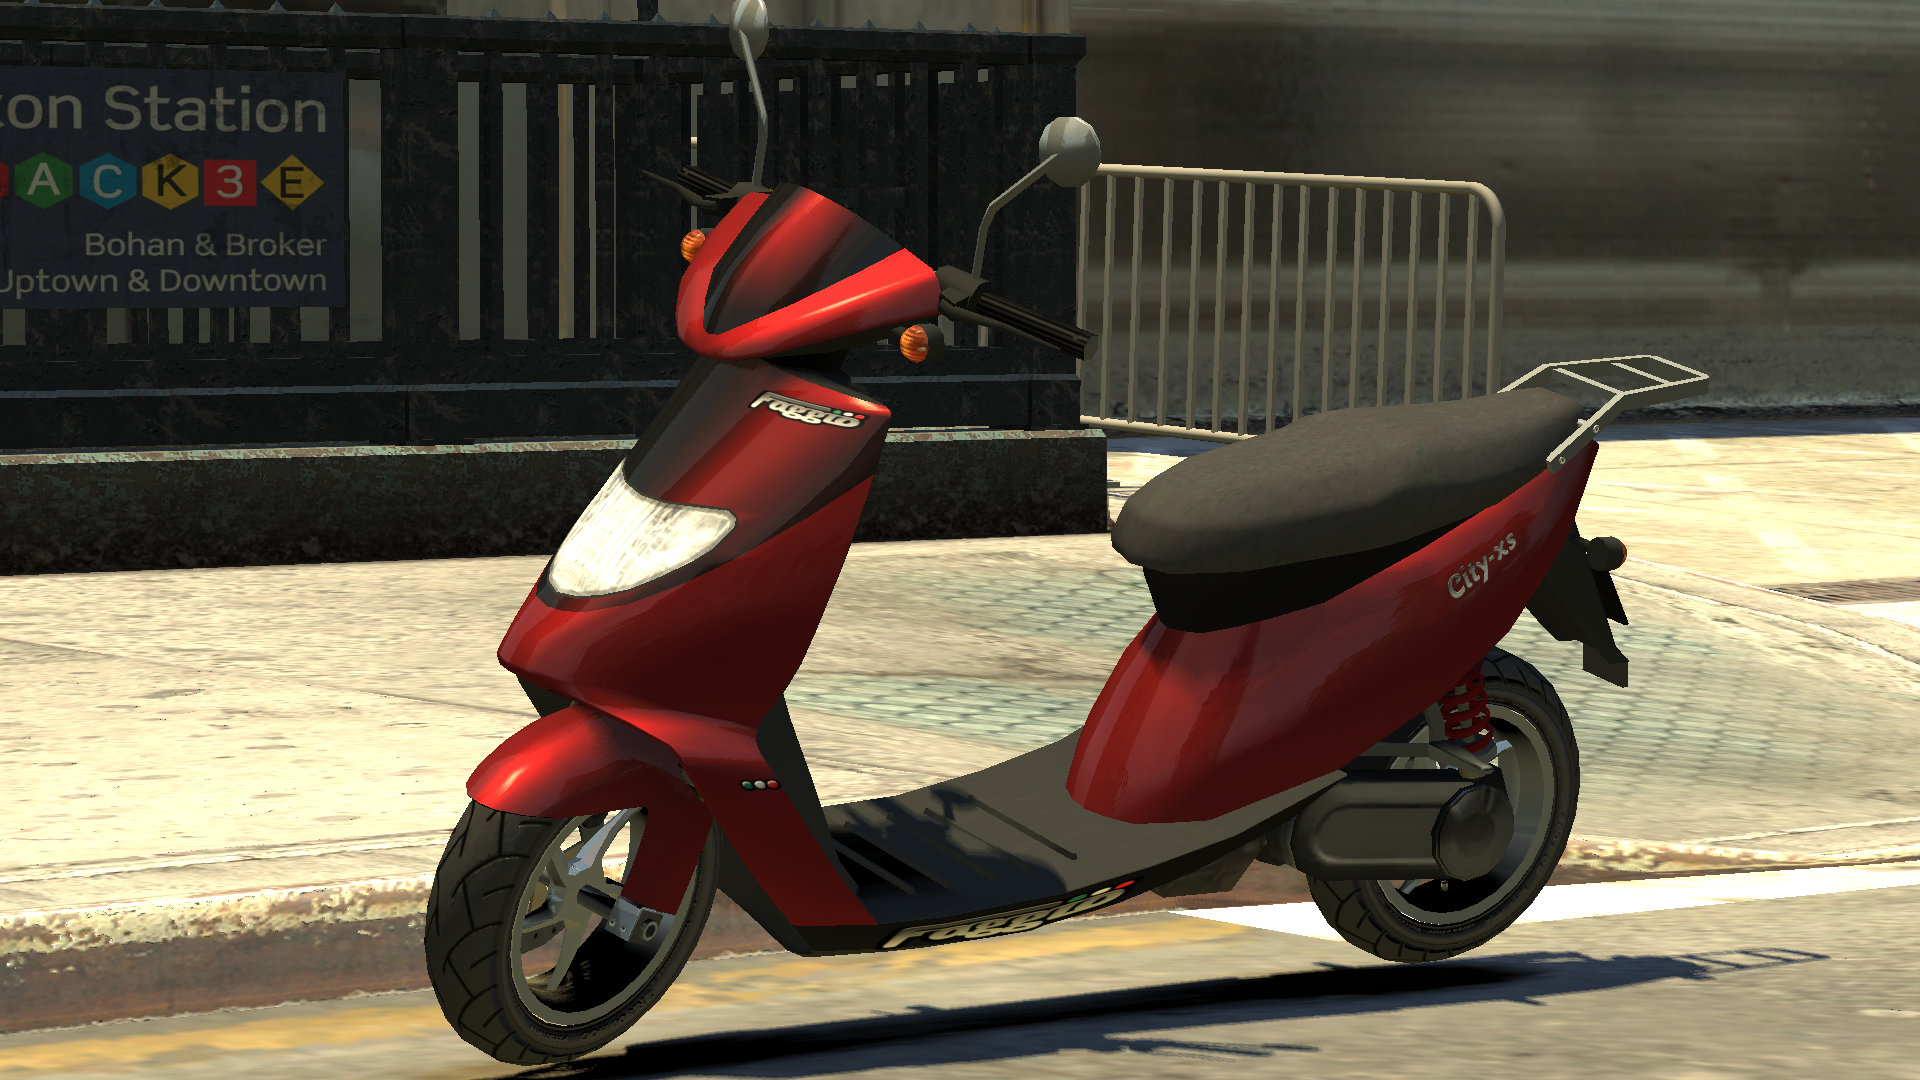 http://vignette1.wikia.nocookie.net/gtawiki/images/2/26/Faggio-GTAIV-front.png/revision/latest?cb=20160224190636